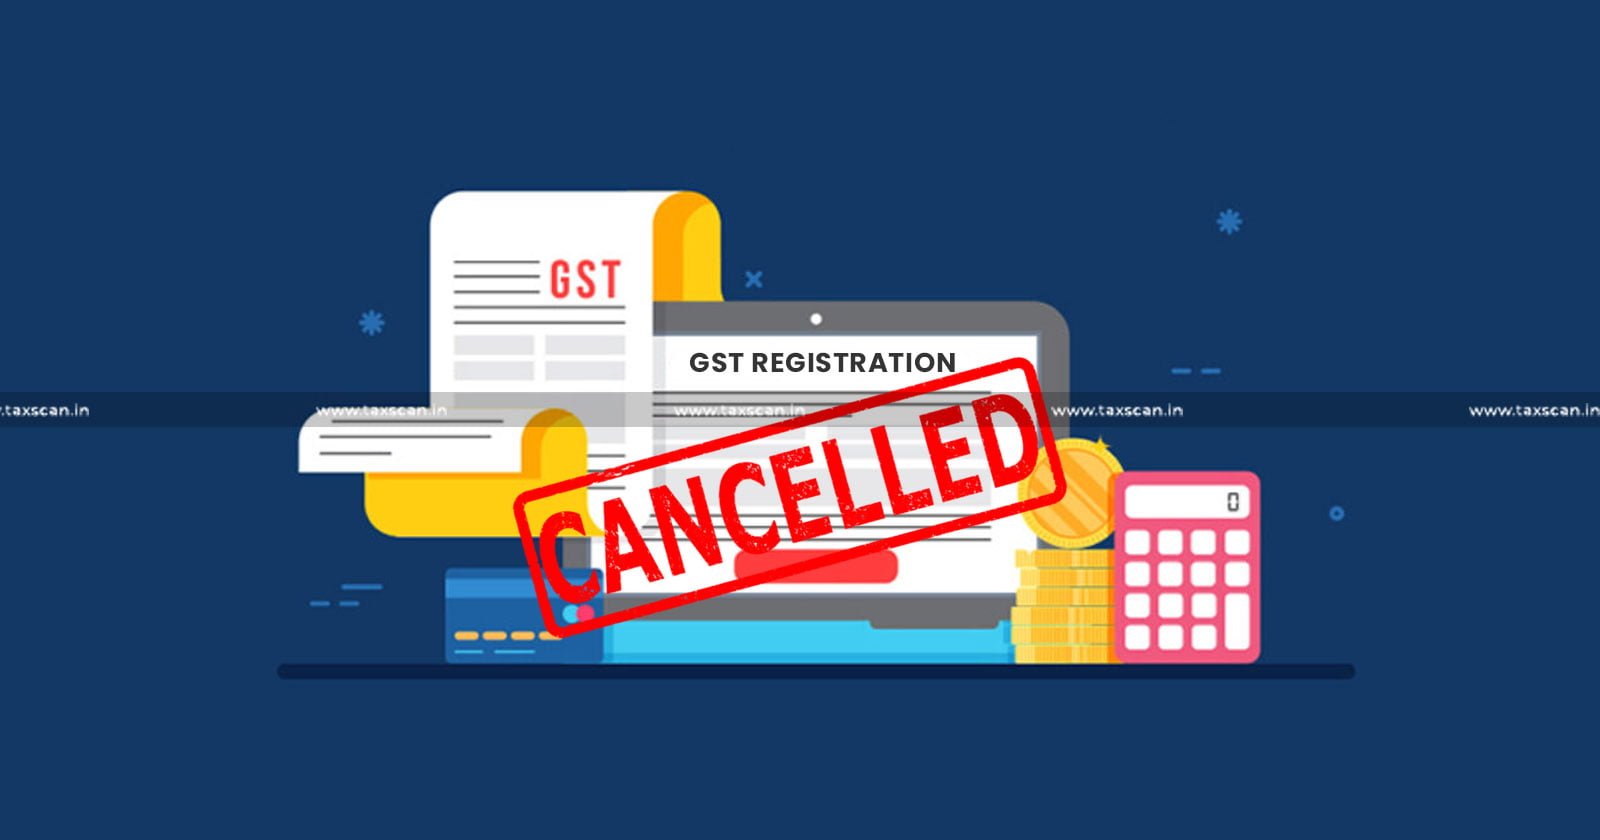 Order for Cancellation of GST Registration - Cancellation of GST Registration - GST Registration - Amount Payable - Assessee - Gujarat High Court - Taxscan